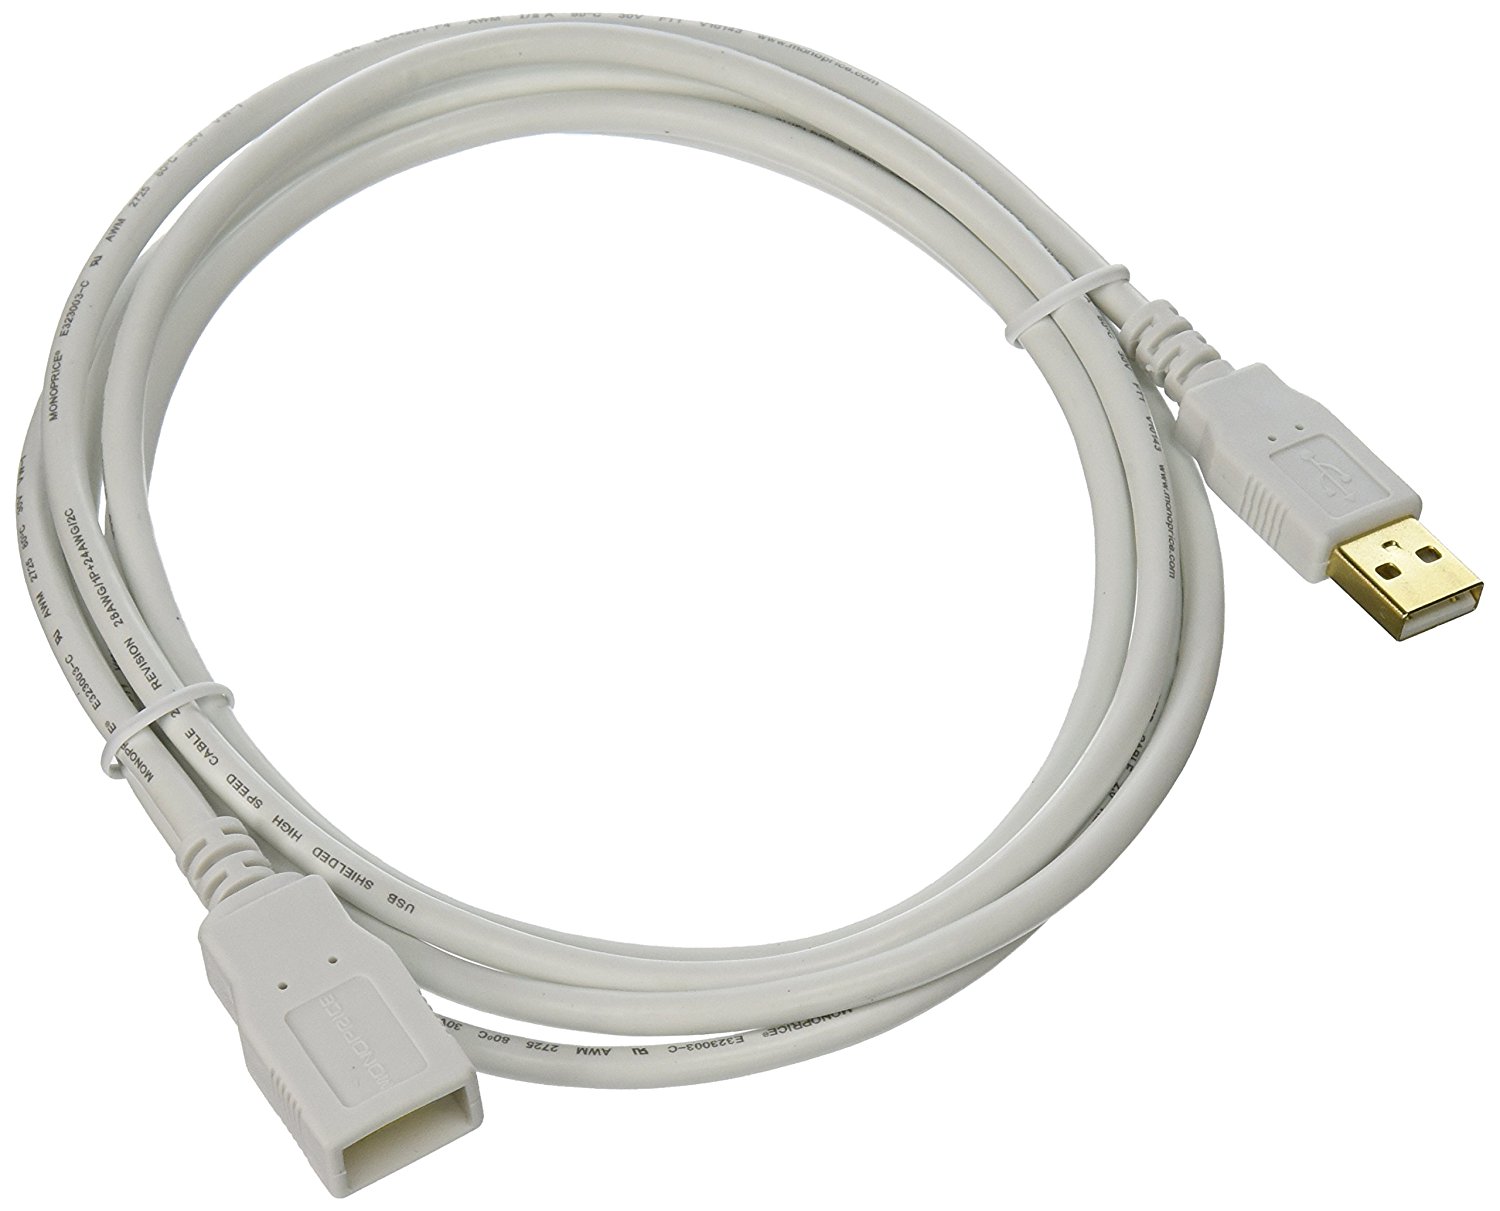 Monoprice 6-Feet USB 2.0 Extension Cable - $1.21 + Free Prime Shipping 